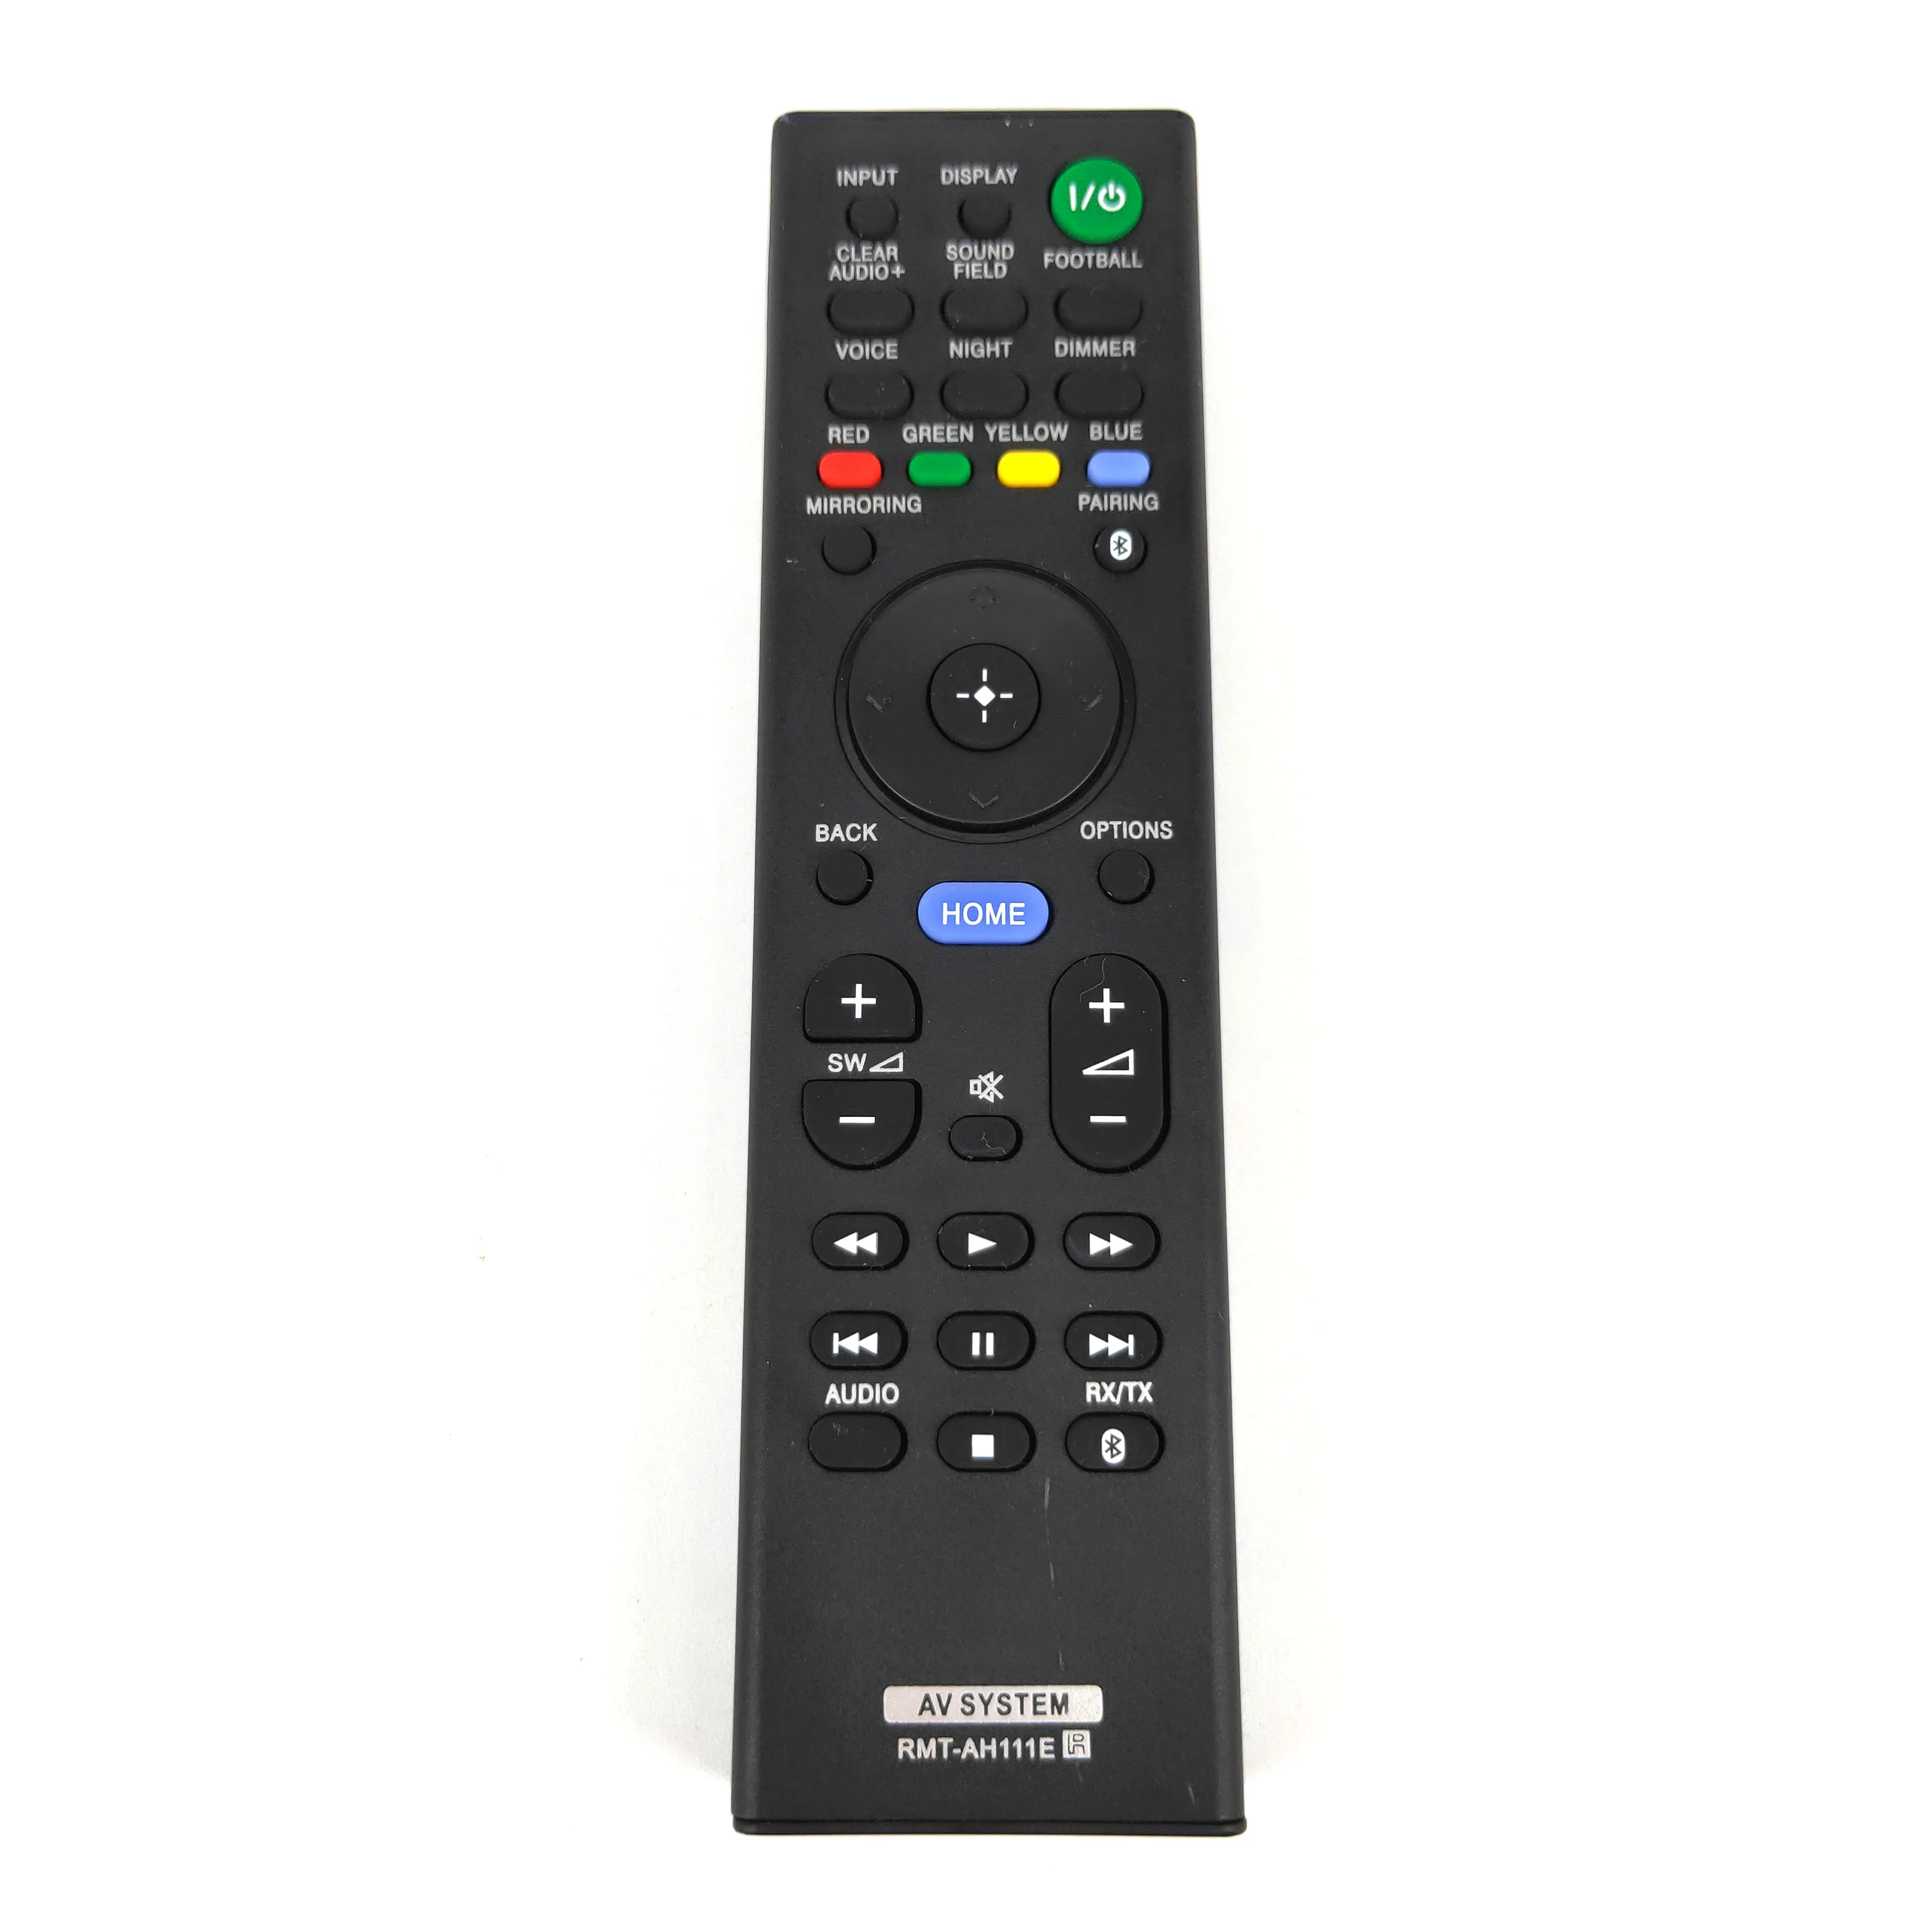 

NEW RMT-AH111E for Sony Sound bar Home Theatre System Remote Control for HT-ST5 HT-XT1 HT-CT290 HT-CT291 HT-NT3 SA-CT390